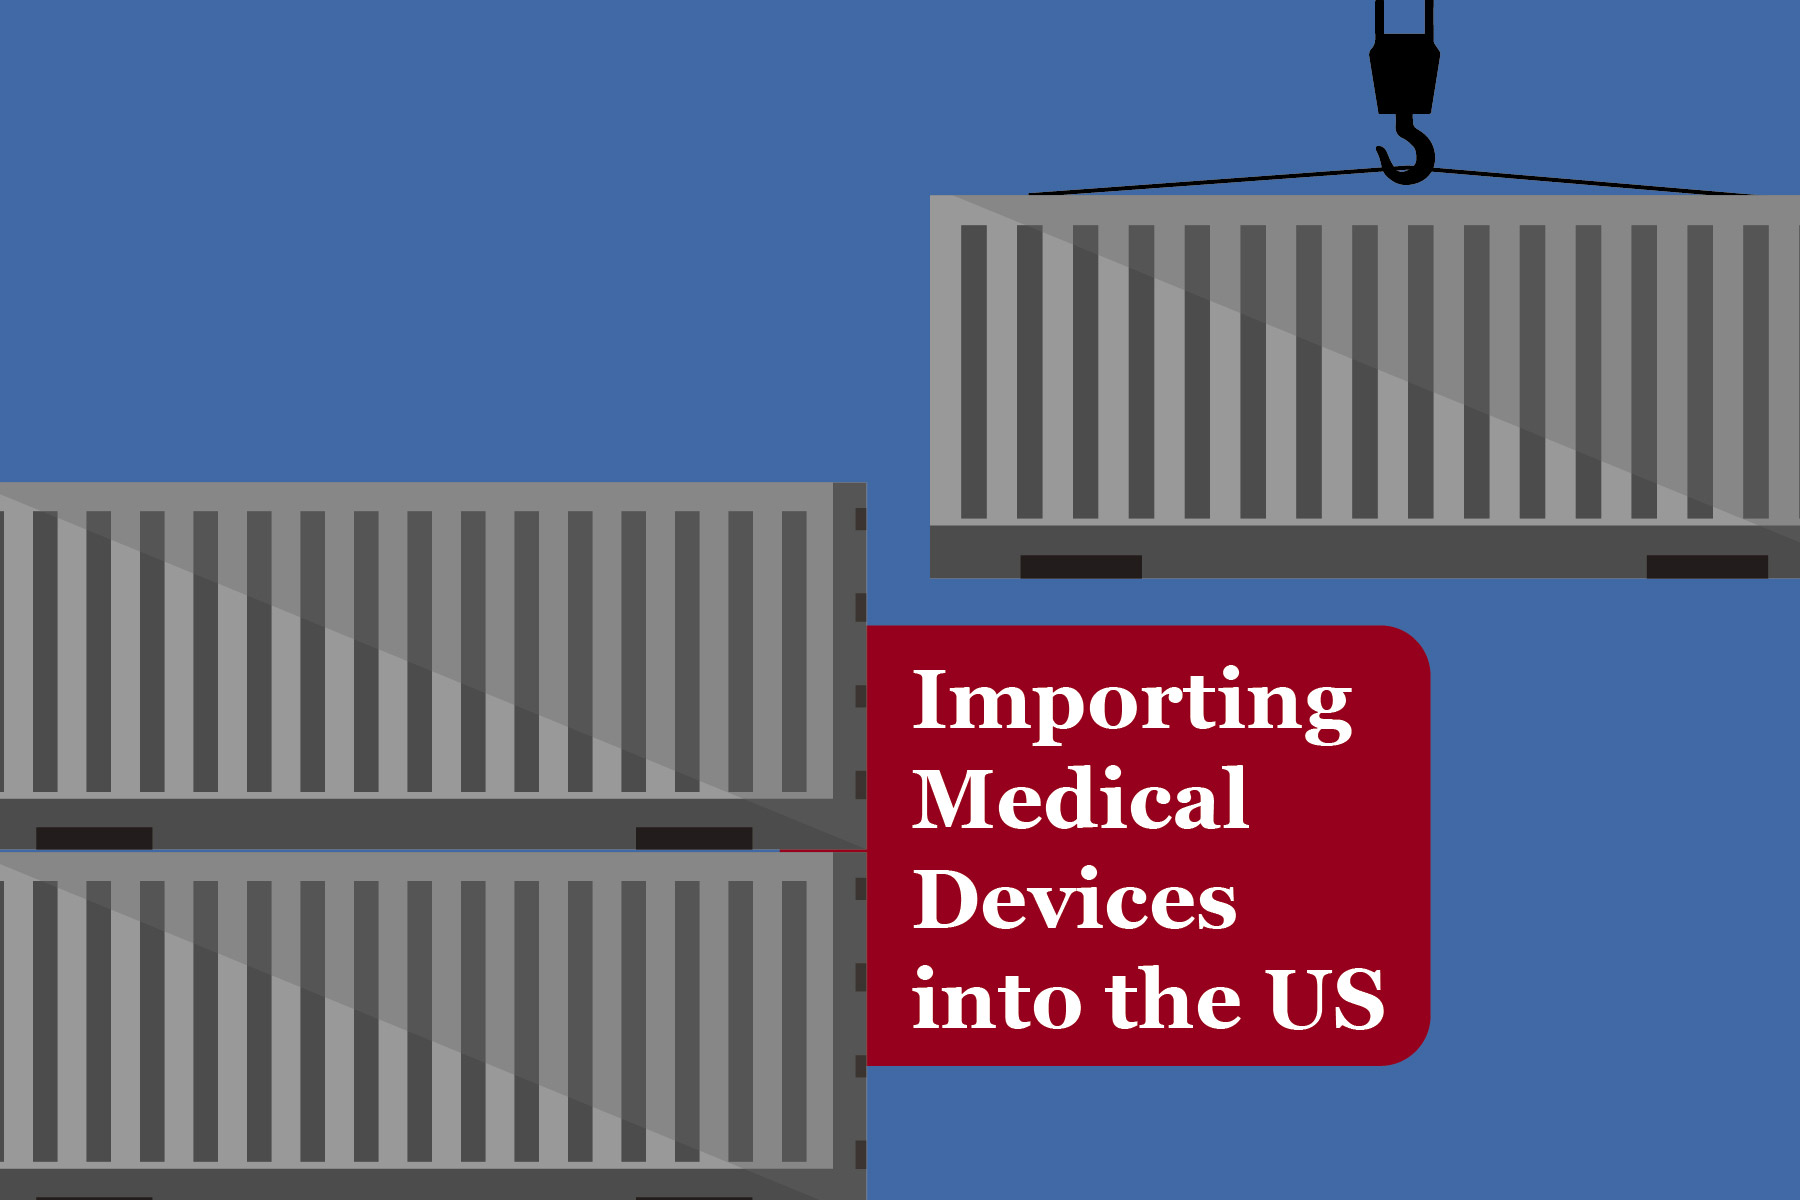 Importing Medical Devices into the US